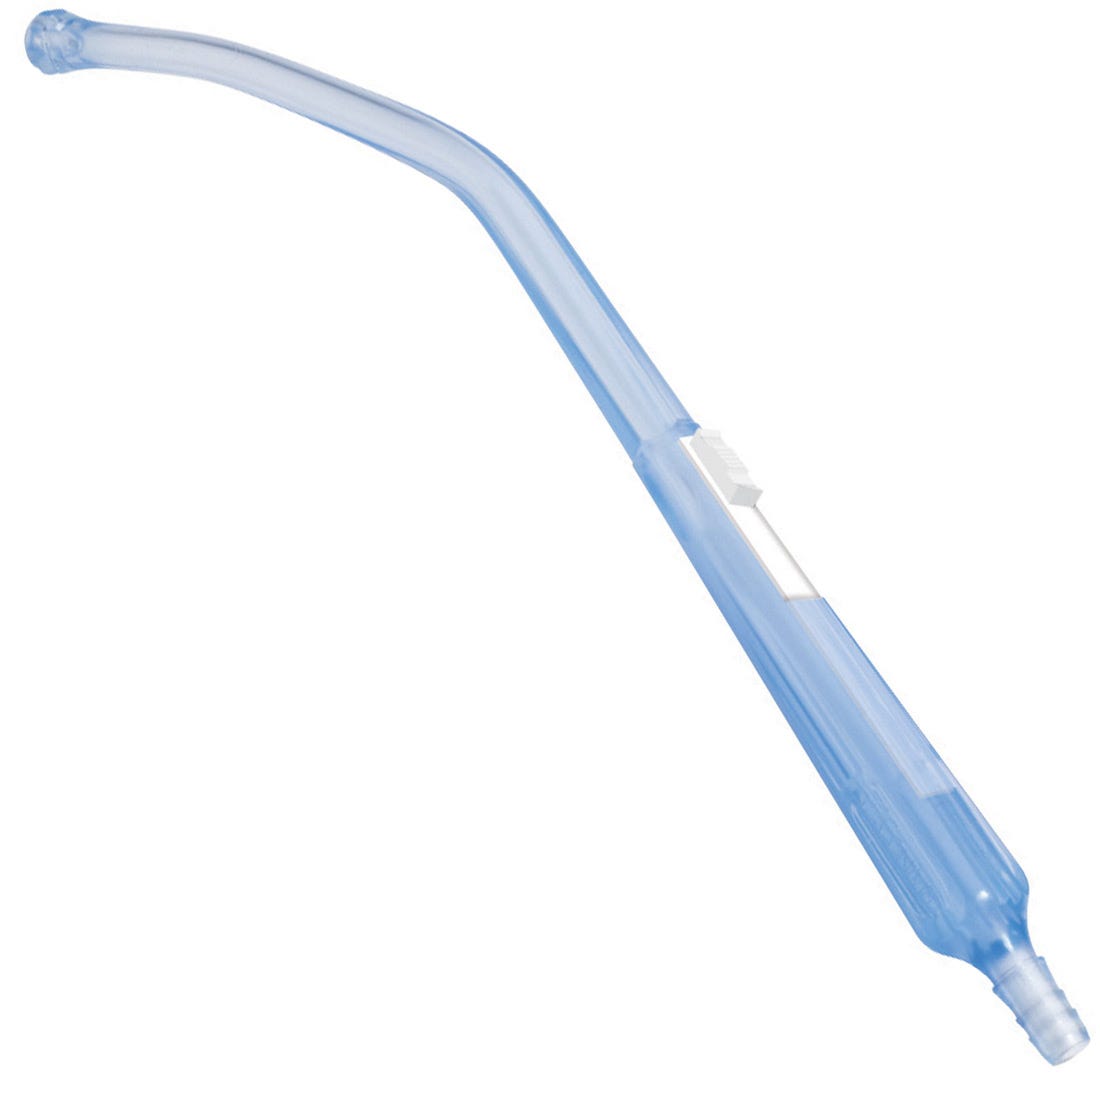 YANKAUER SURGICAL Suction Tip with On/Off Control Vent